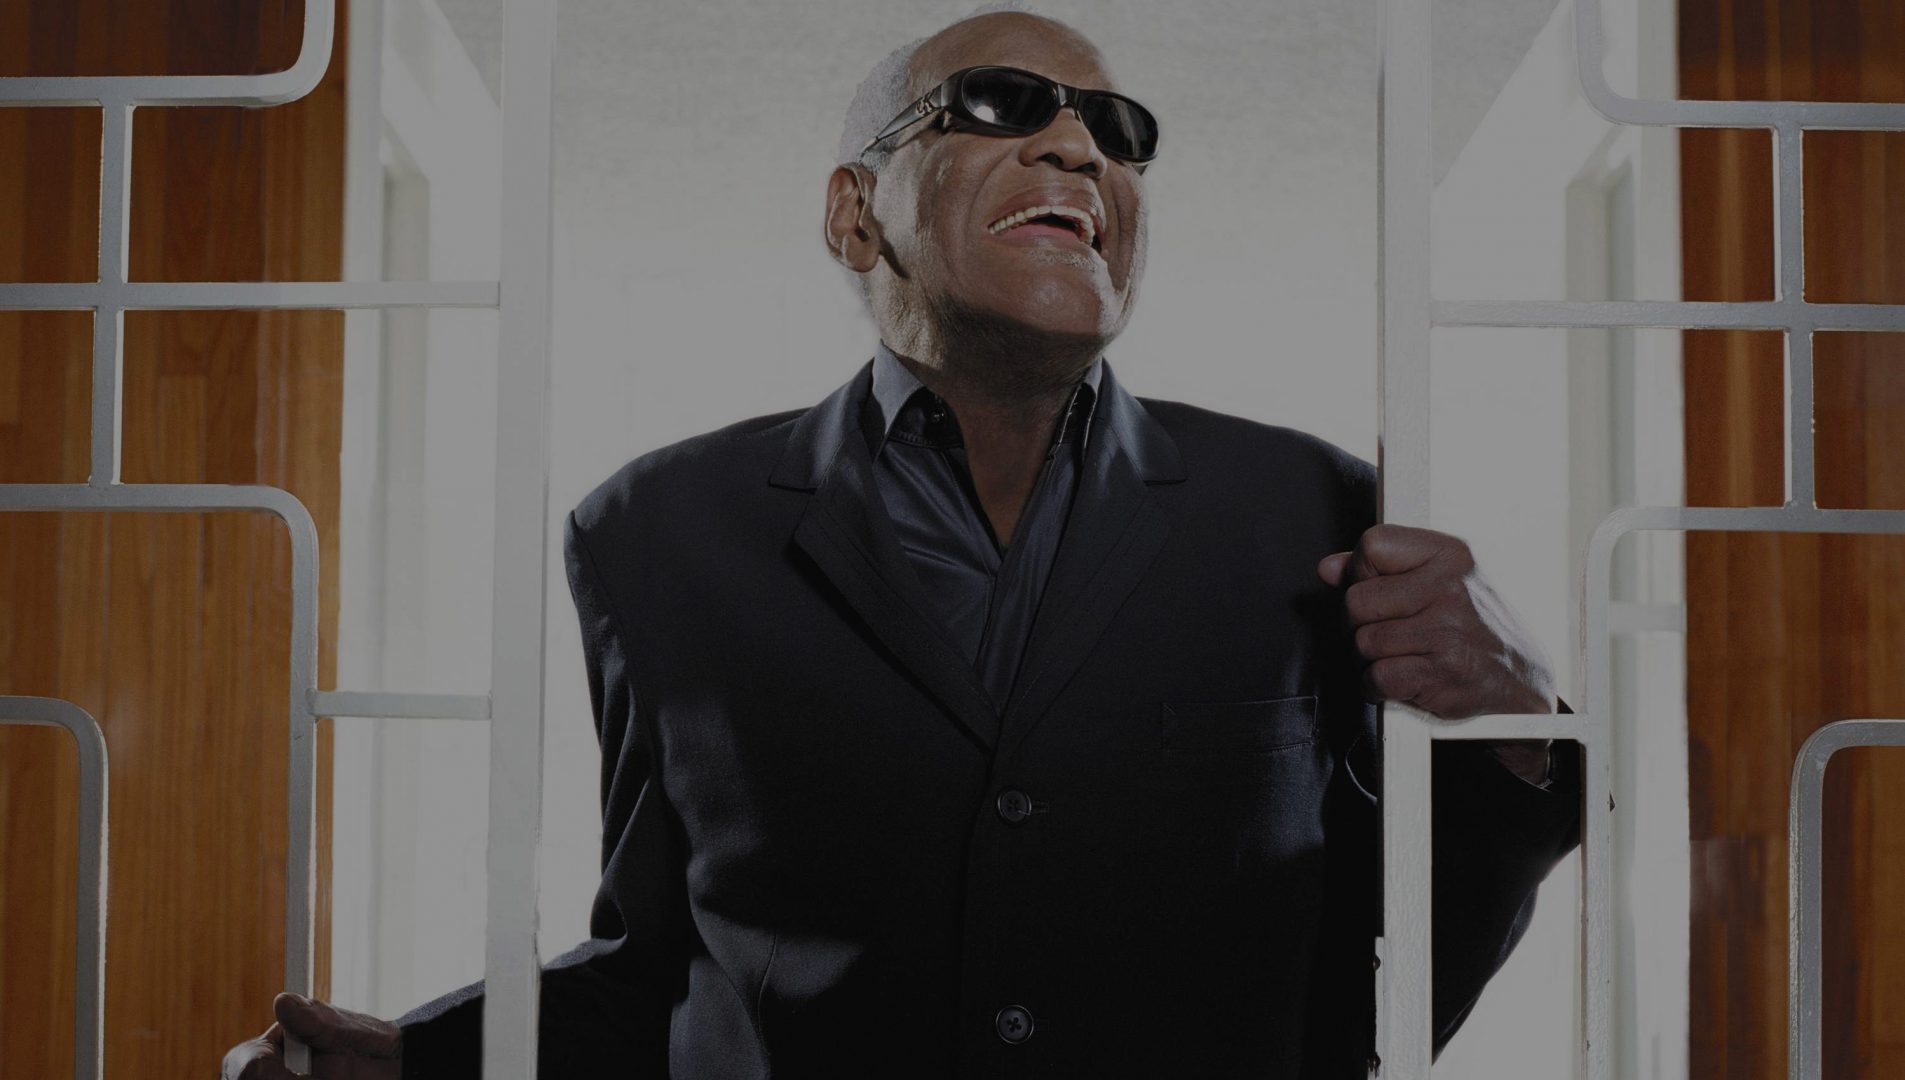 Ray Charles dressed in a black suit holding on to a decorative metal gate